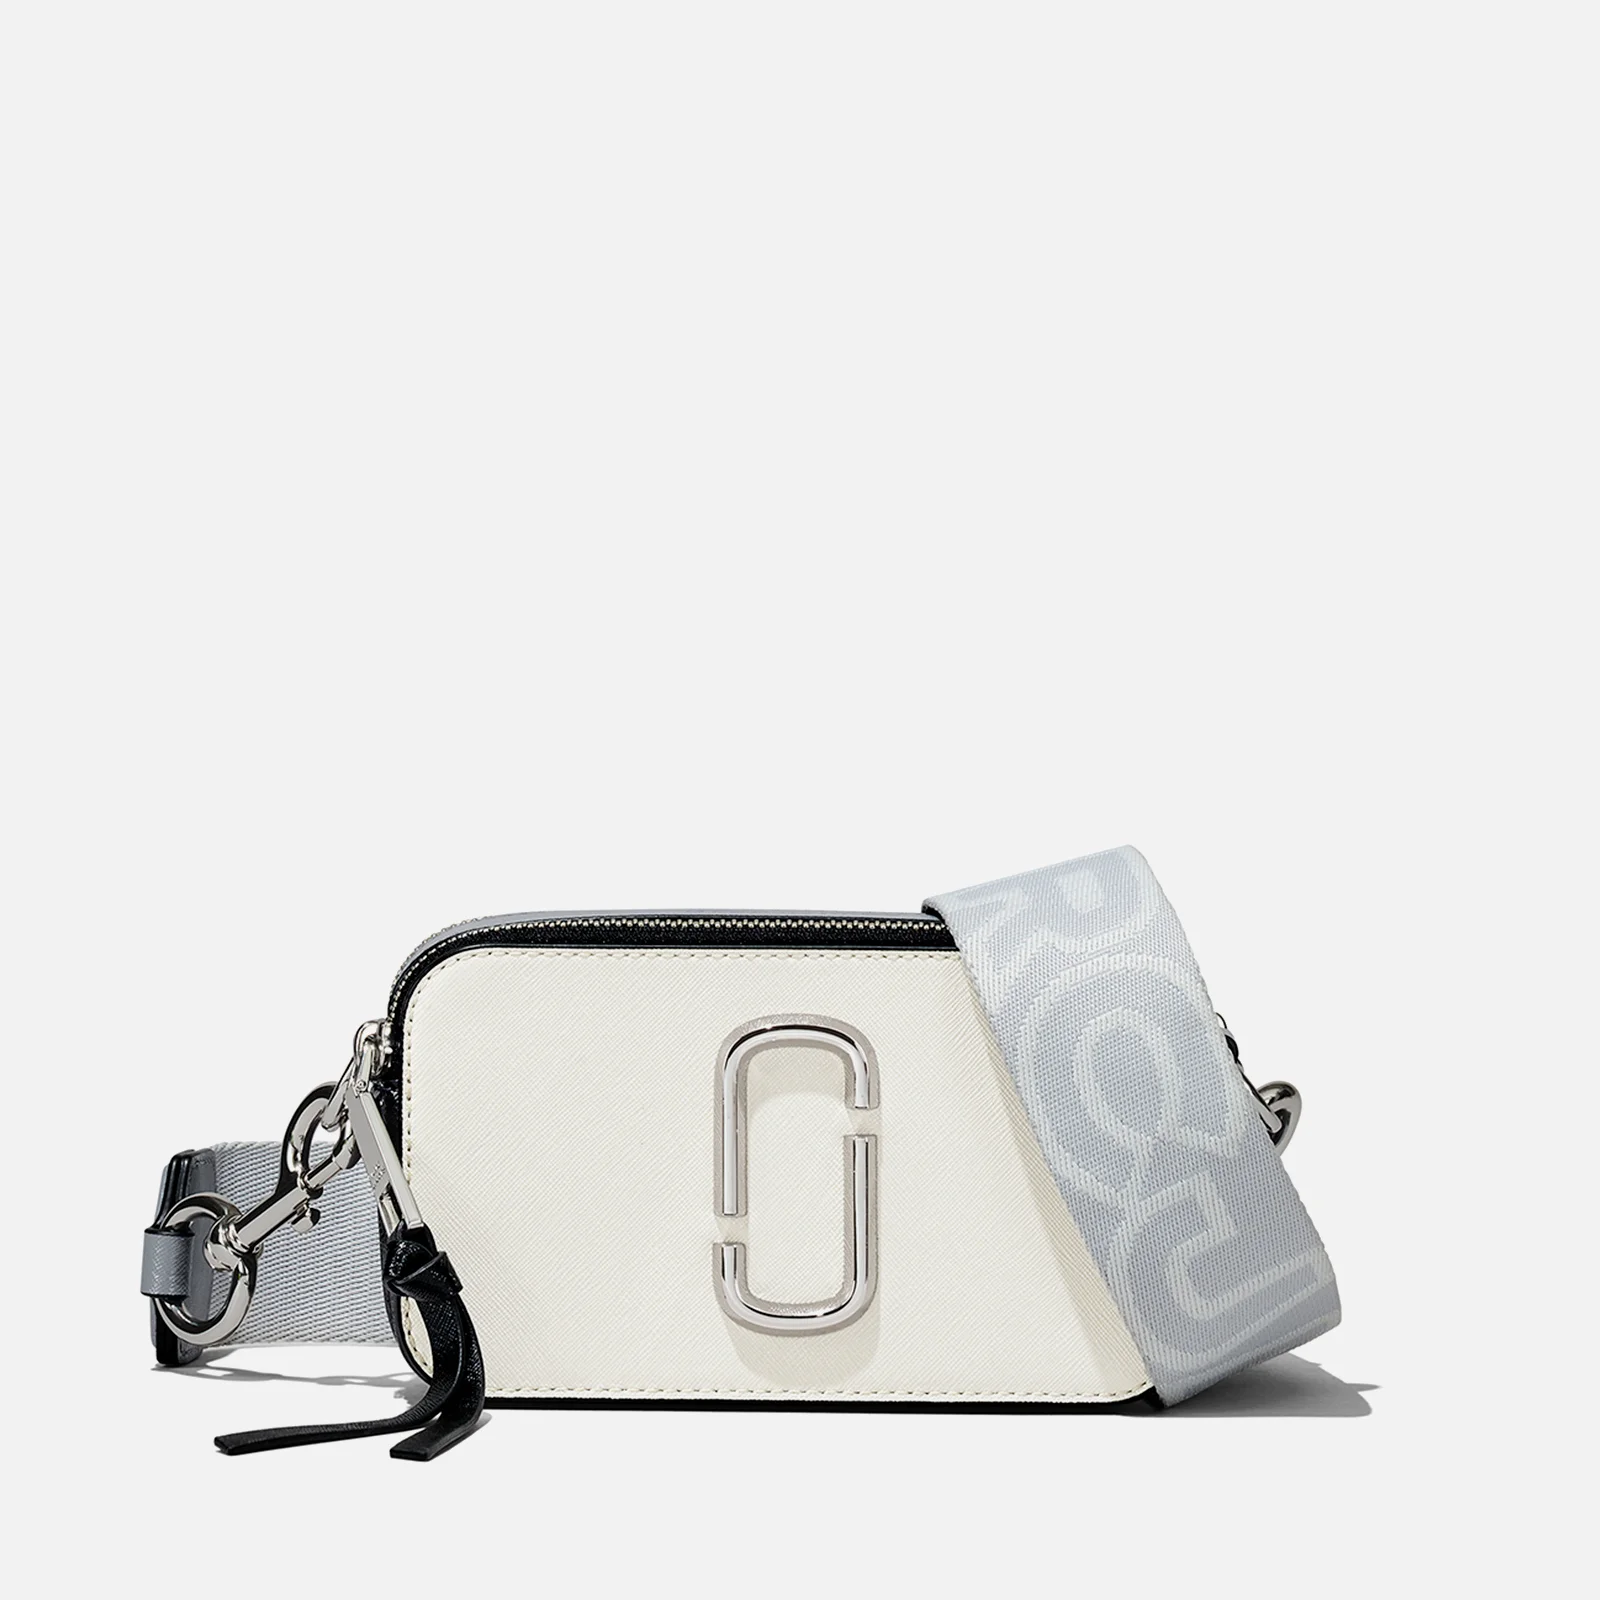 Marc Jacobs The Snapshot Saffiano Leather Image 1